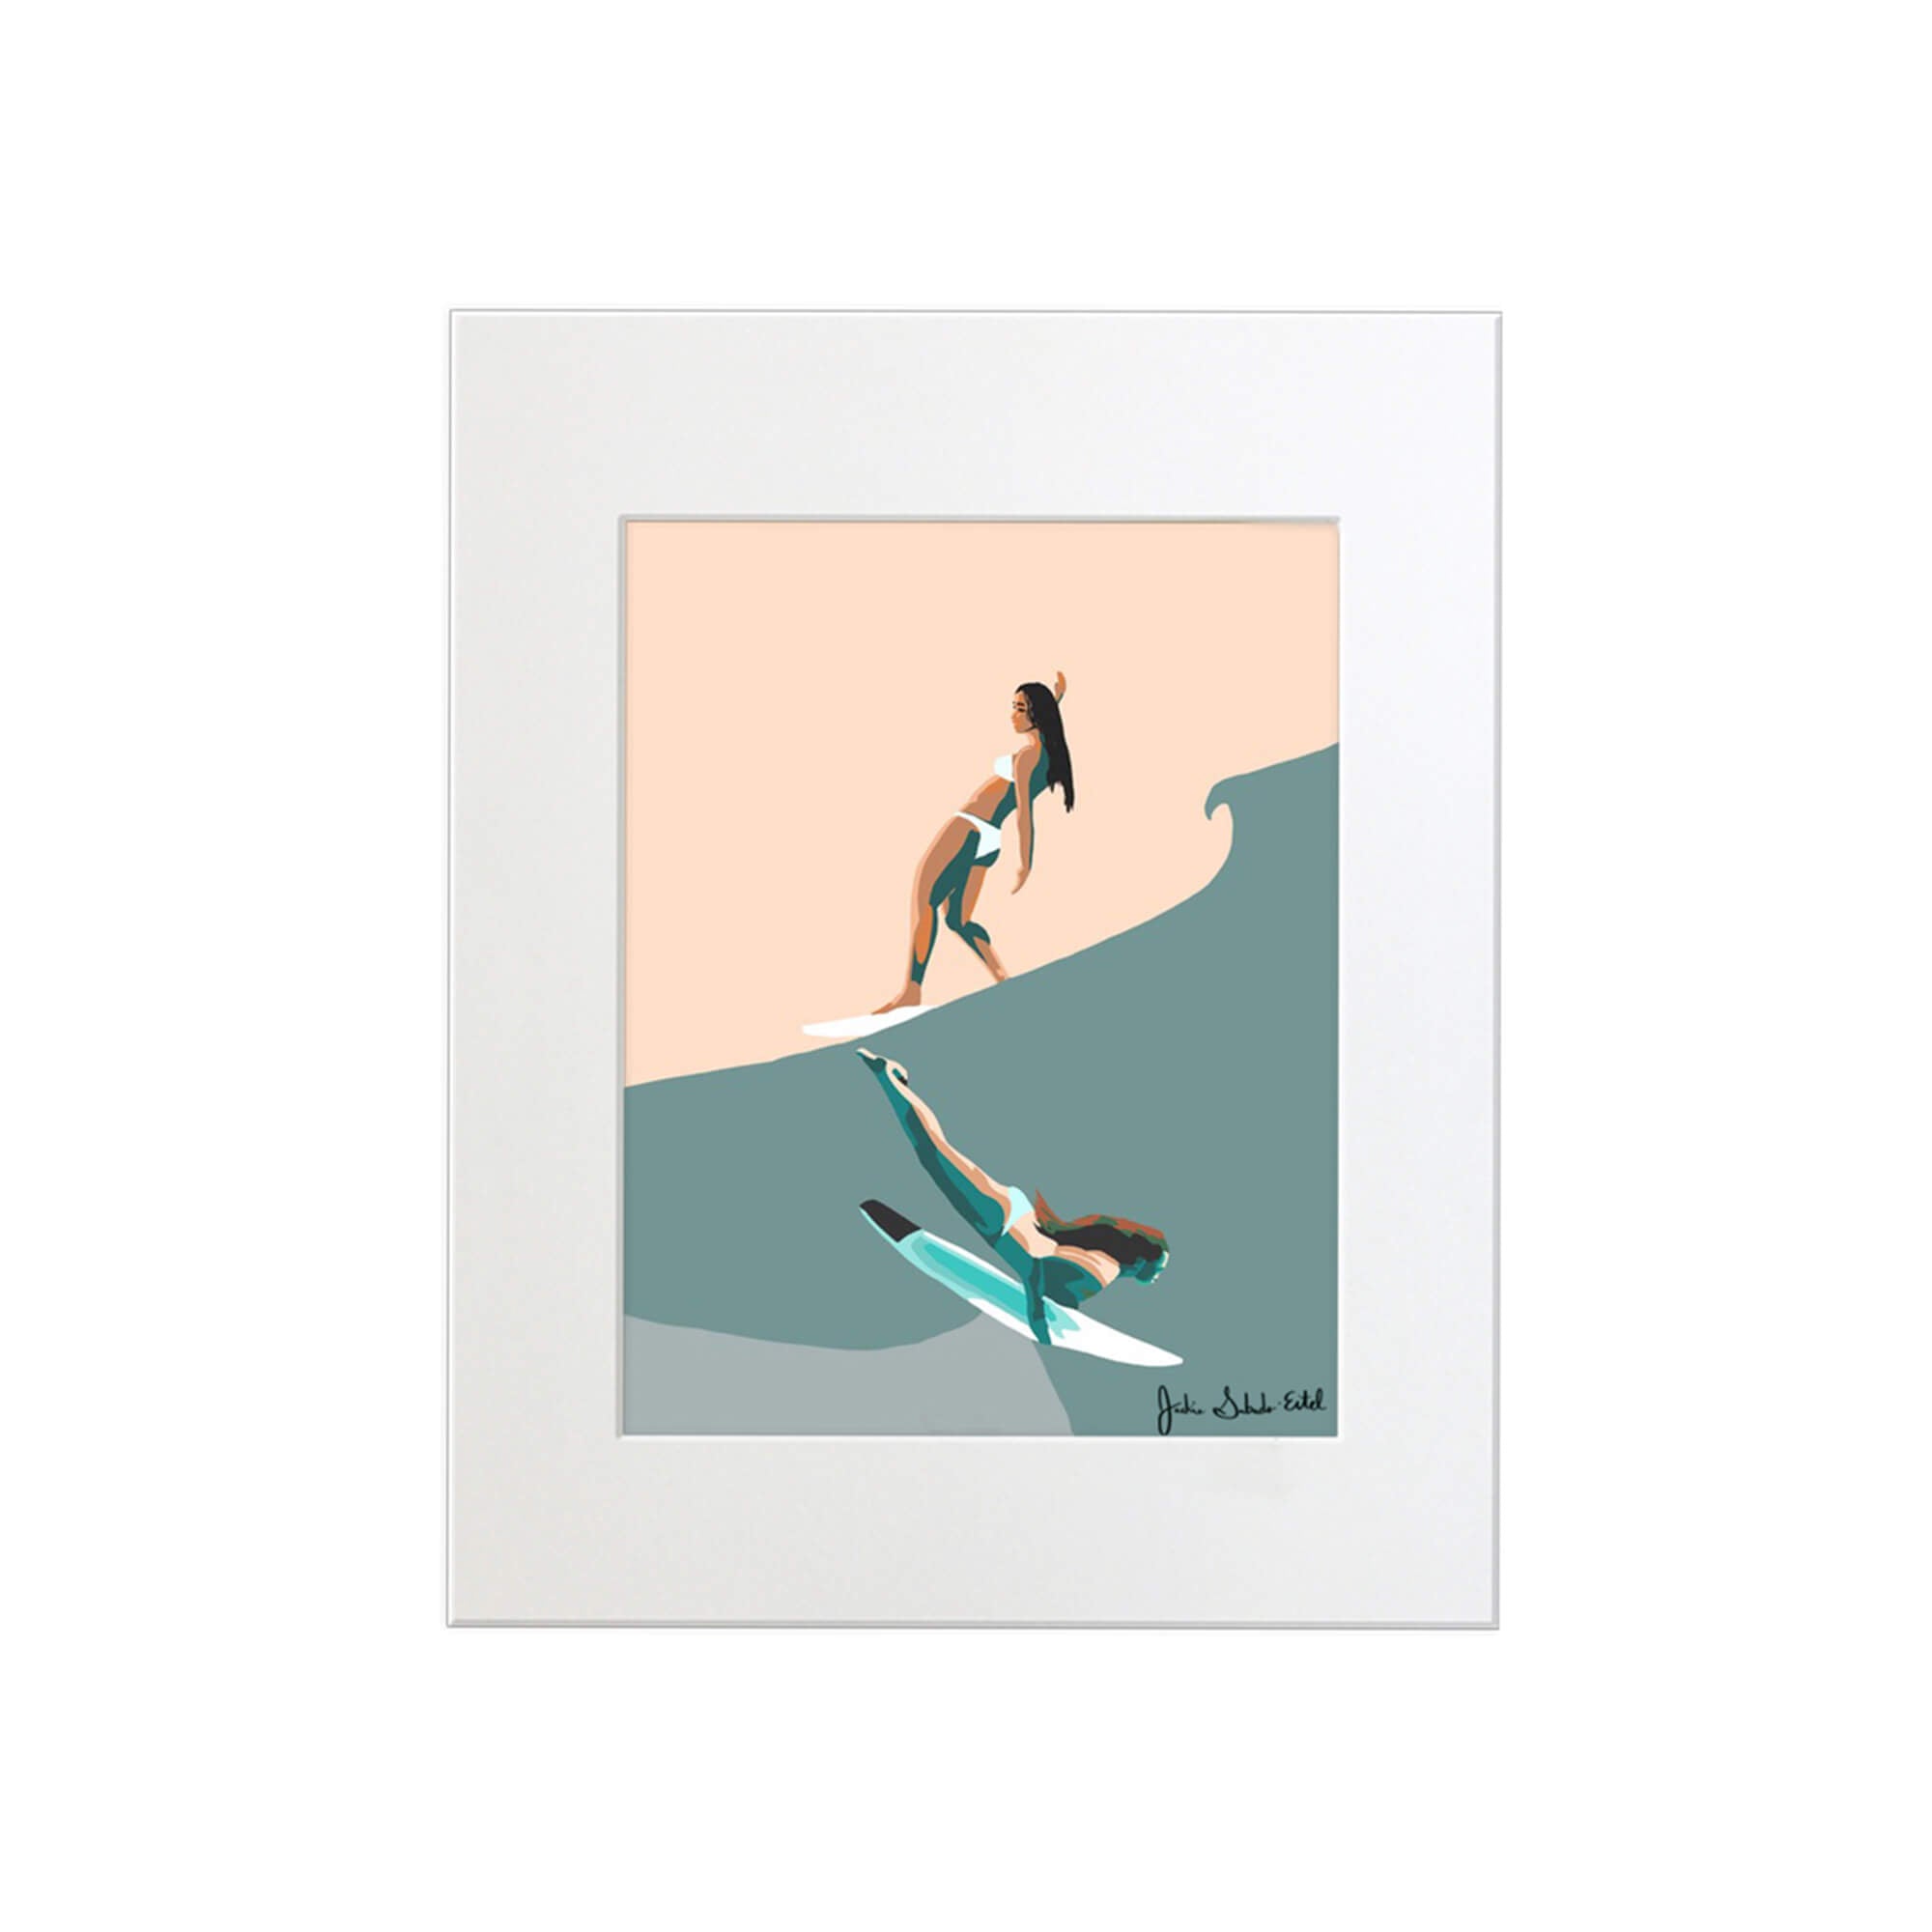 A matted art print featuring two female surfers, one riding the waves and the other just right beneath by Hawaii artist Jackie Eitel